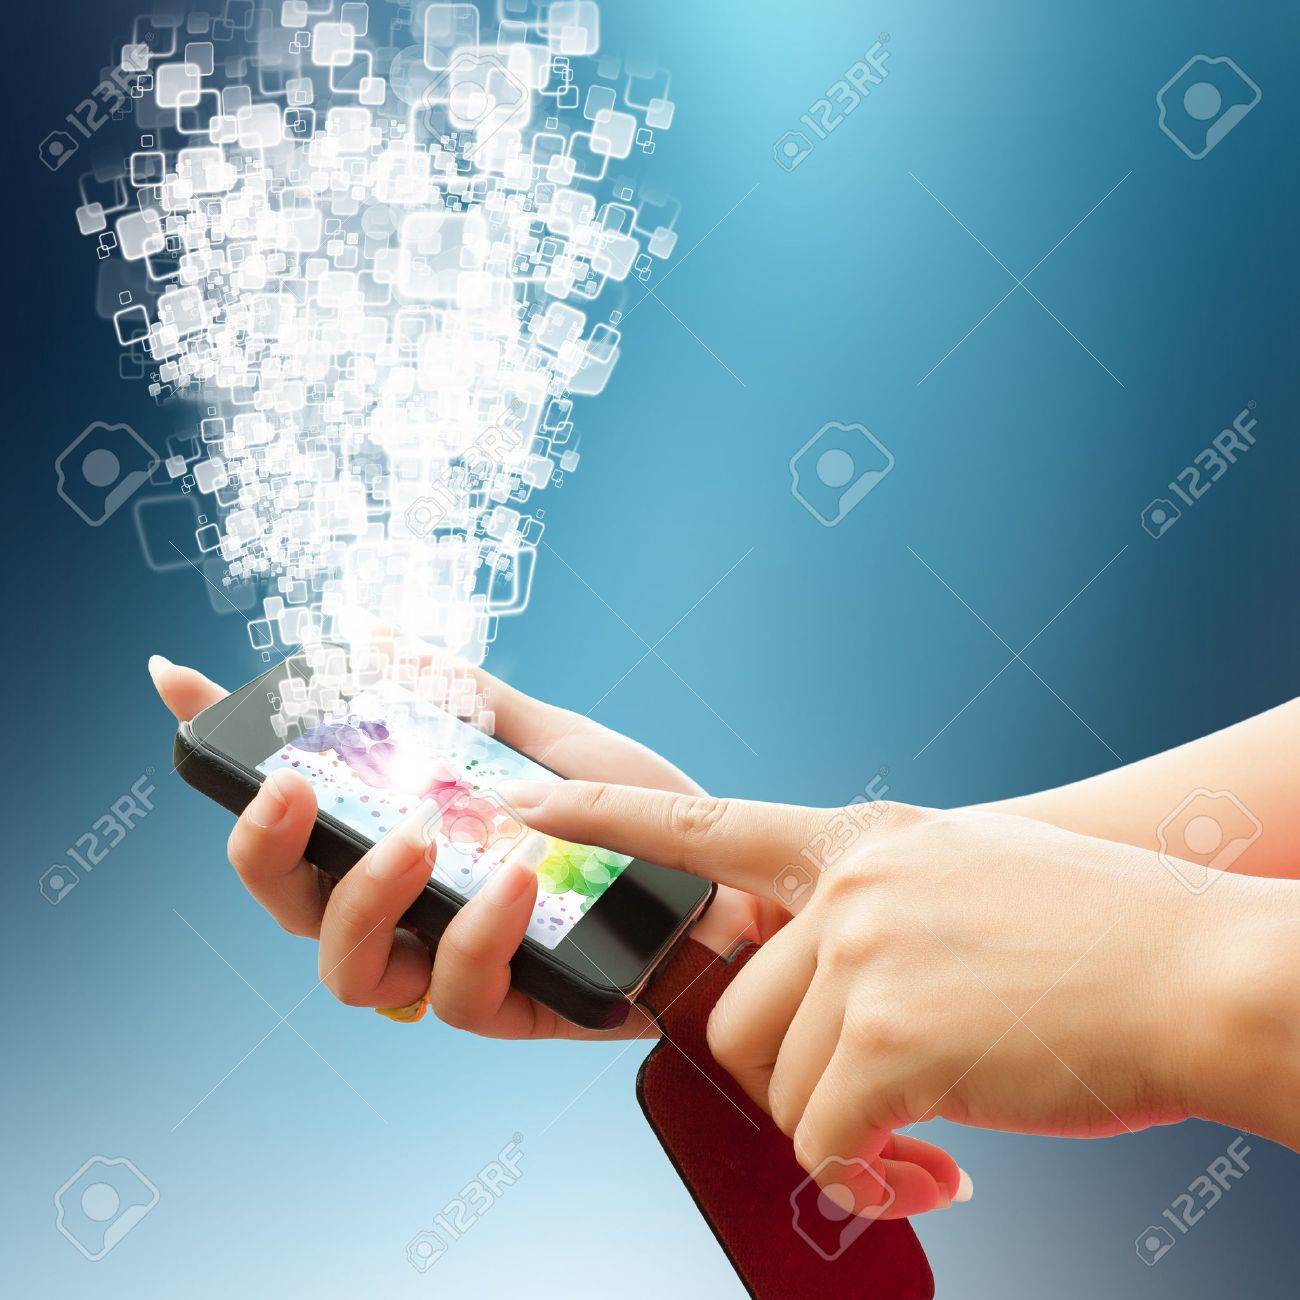 Hand Women Touch Smart Phone In On White Background Stock